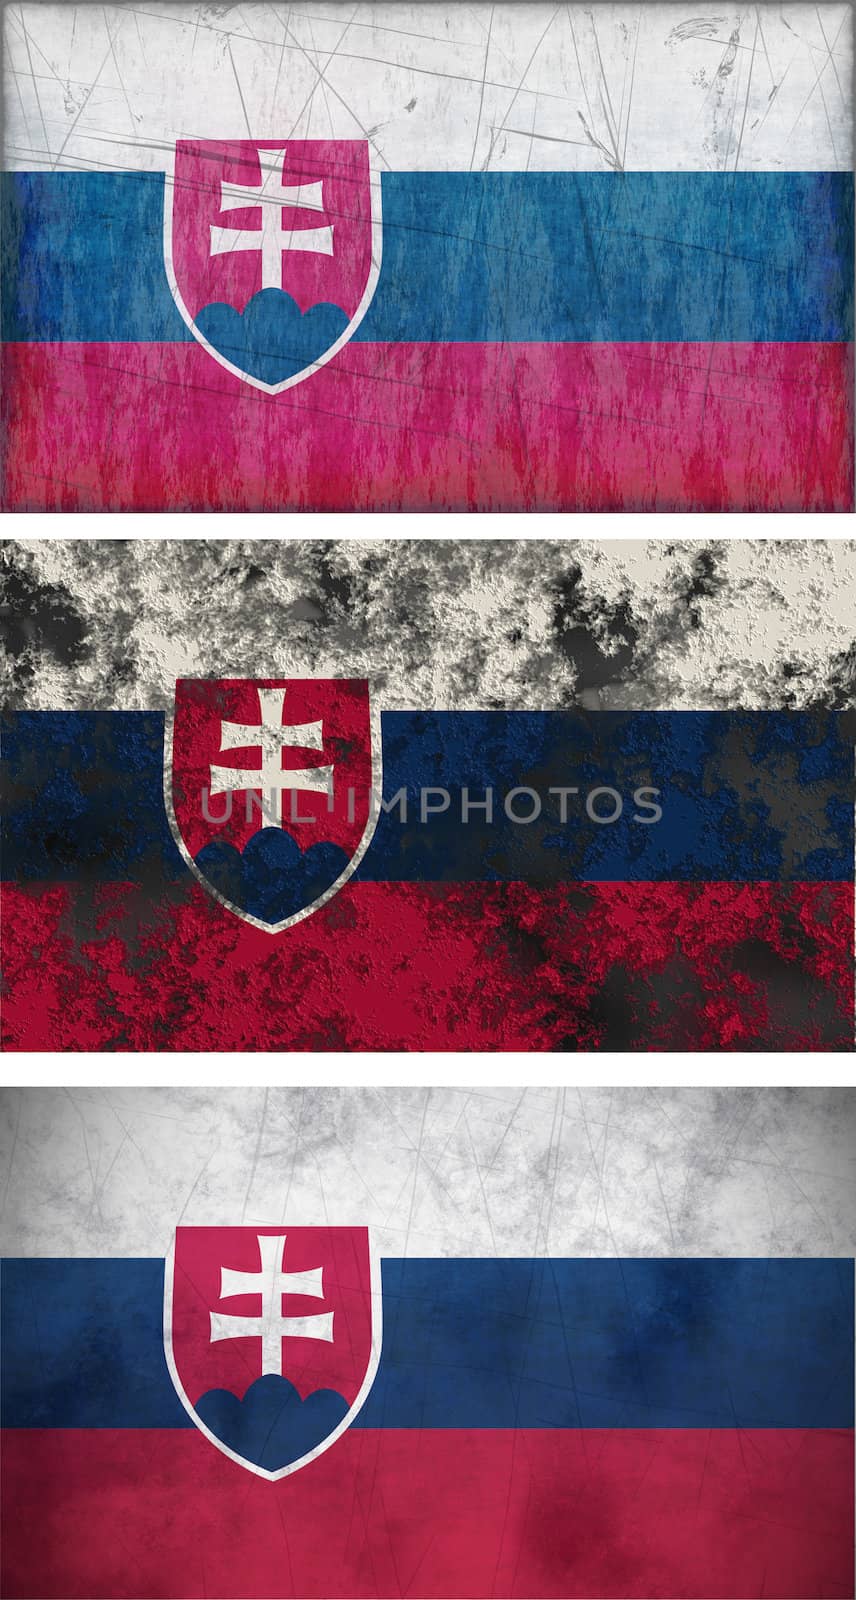 Great Image of the Flag of Slovakia